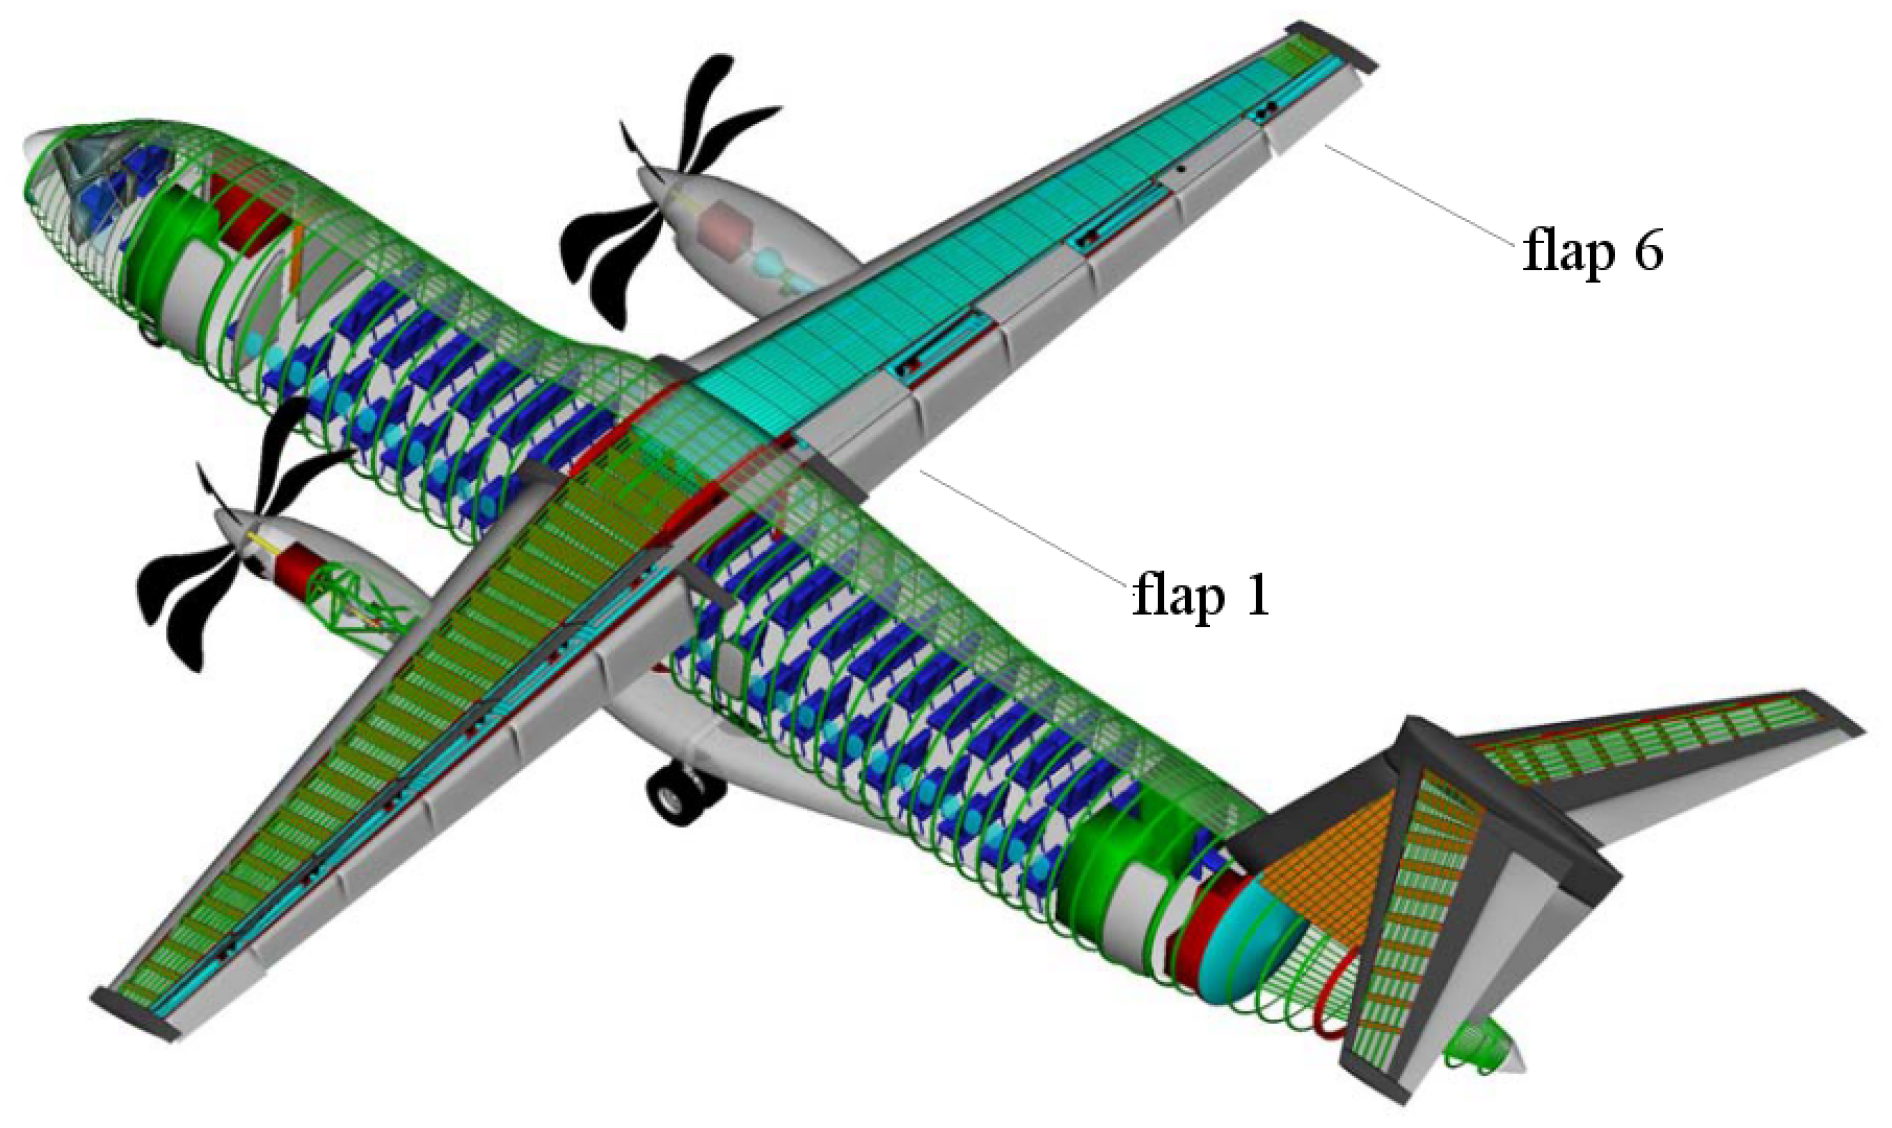 Energies Free Full Text Design Considerations For The Electrical Power Supply Of Future Civil Aircraft With Active High Lift Systems Html - nexans aeronautics roblox review